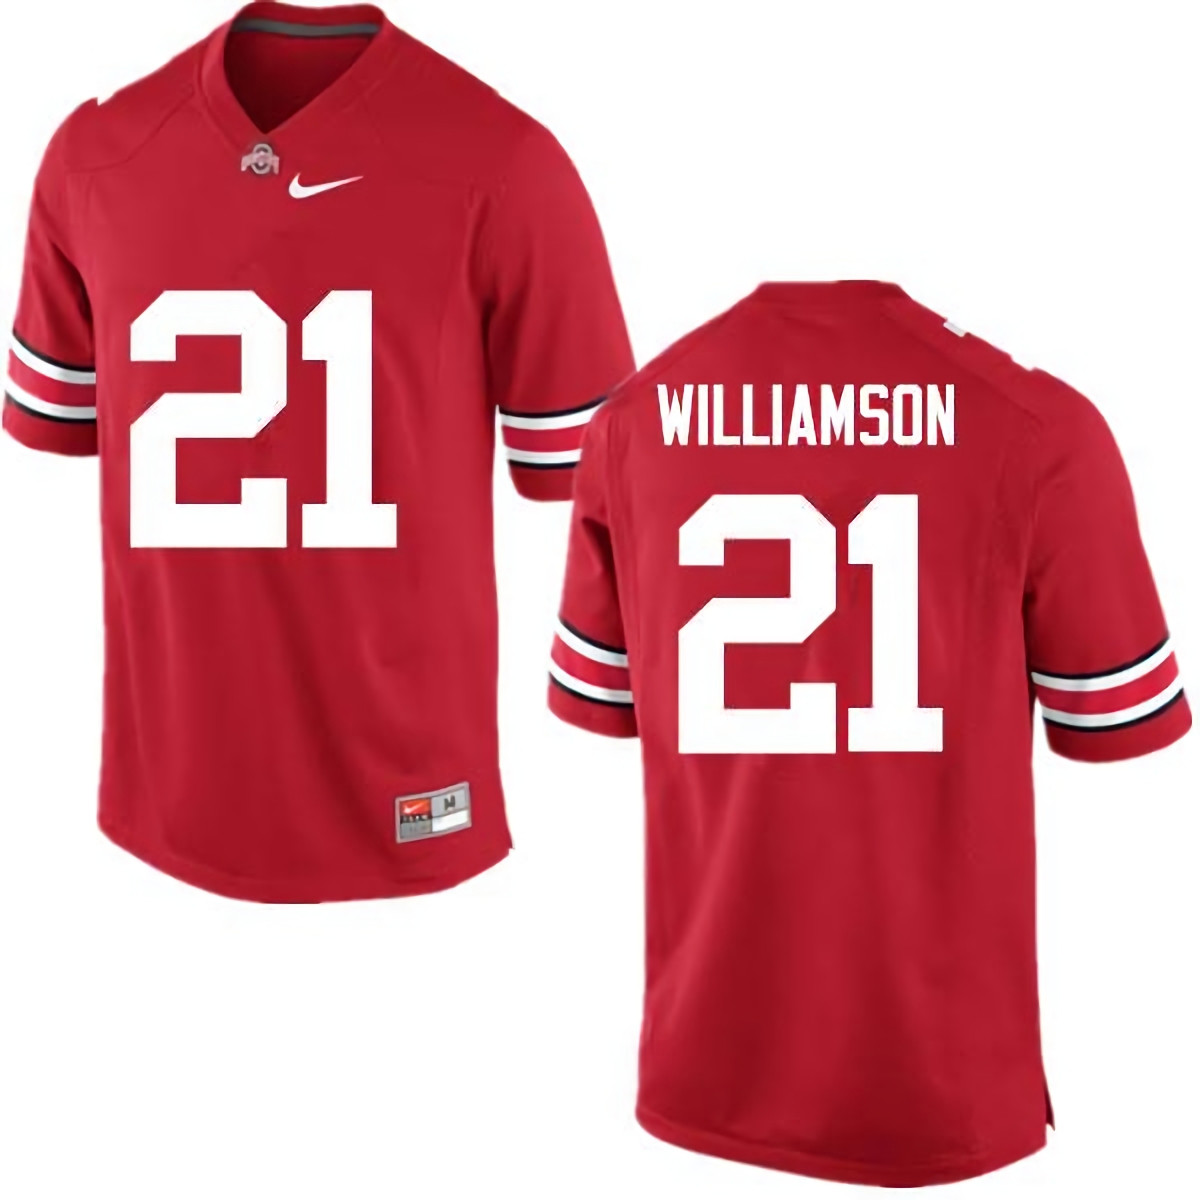 Marcus Williamson Ohio State Buckeyes Men's NCAA #21 Nike Red College Stitched Football Jersey DSJ1656BF